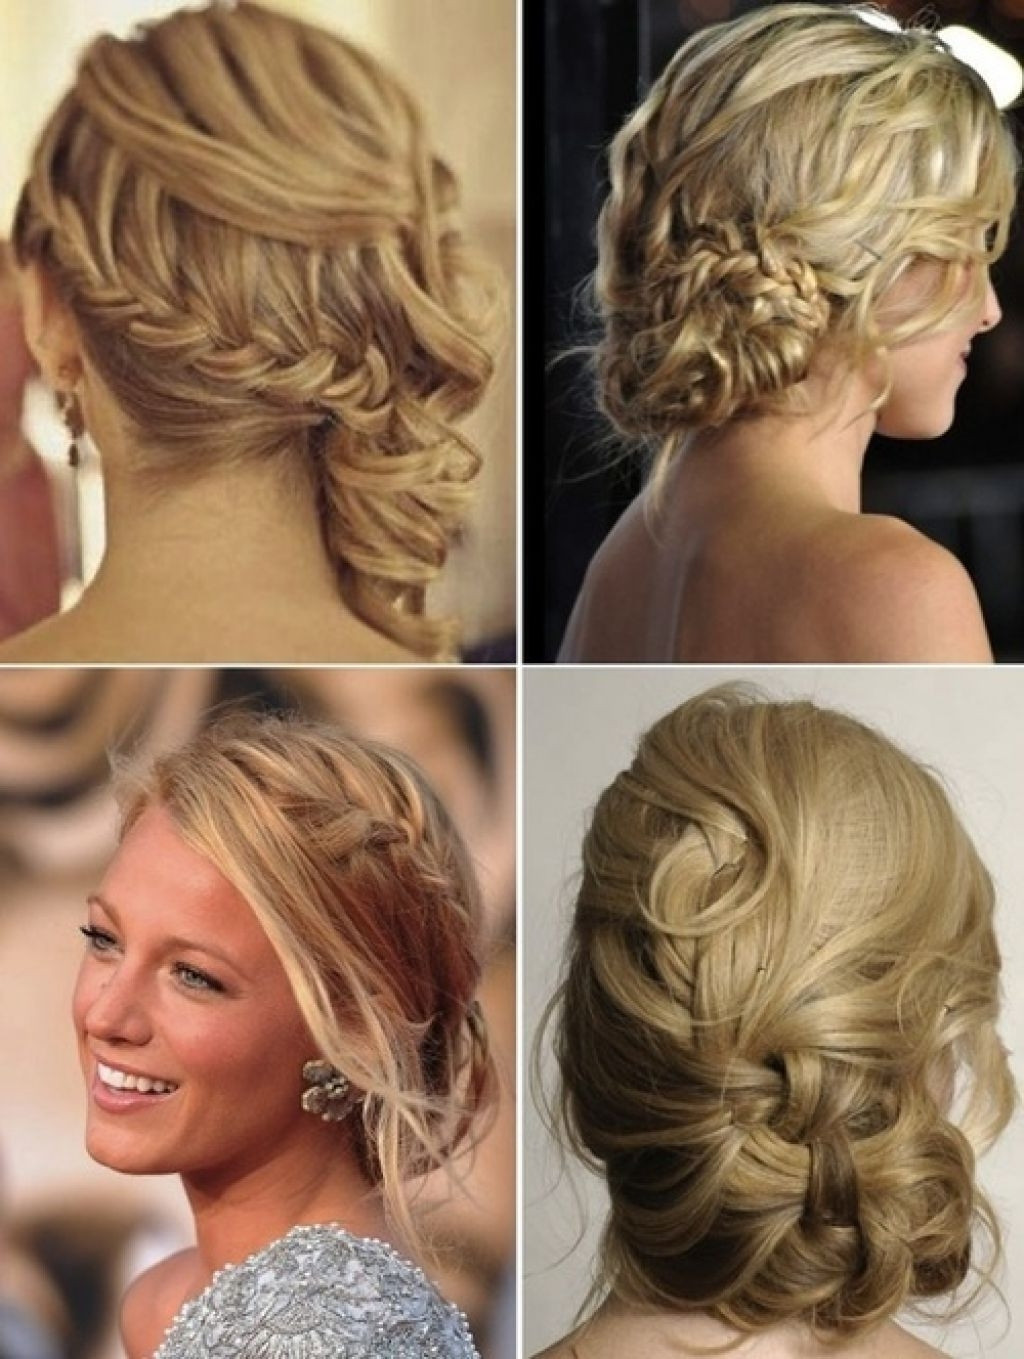 Casual Wedding Hairstyles For Long Hair
 2020 Popular Cute Wedding Guest Hairstyles For Short Hair